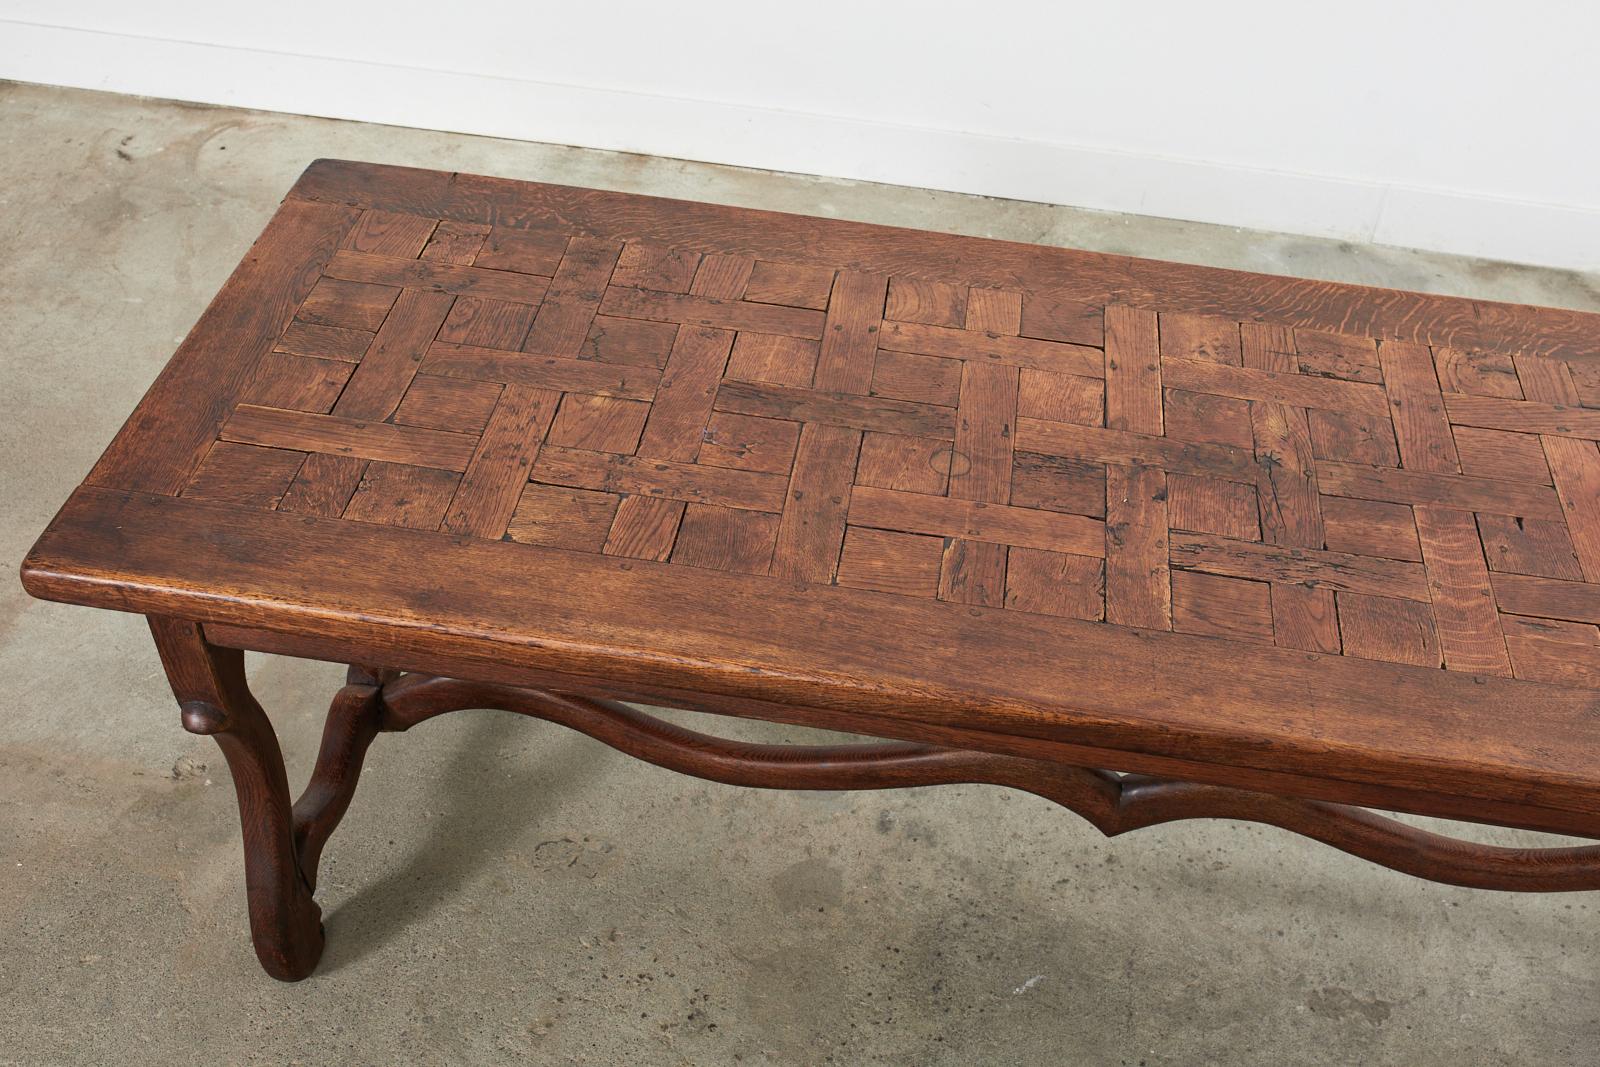 19th Century Country French Parquet Dining Table Os de Mouton Legs In Distressed Condition In Rio Vista, CA